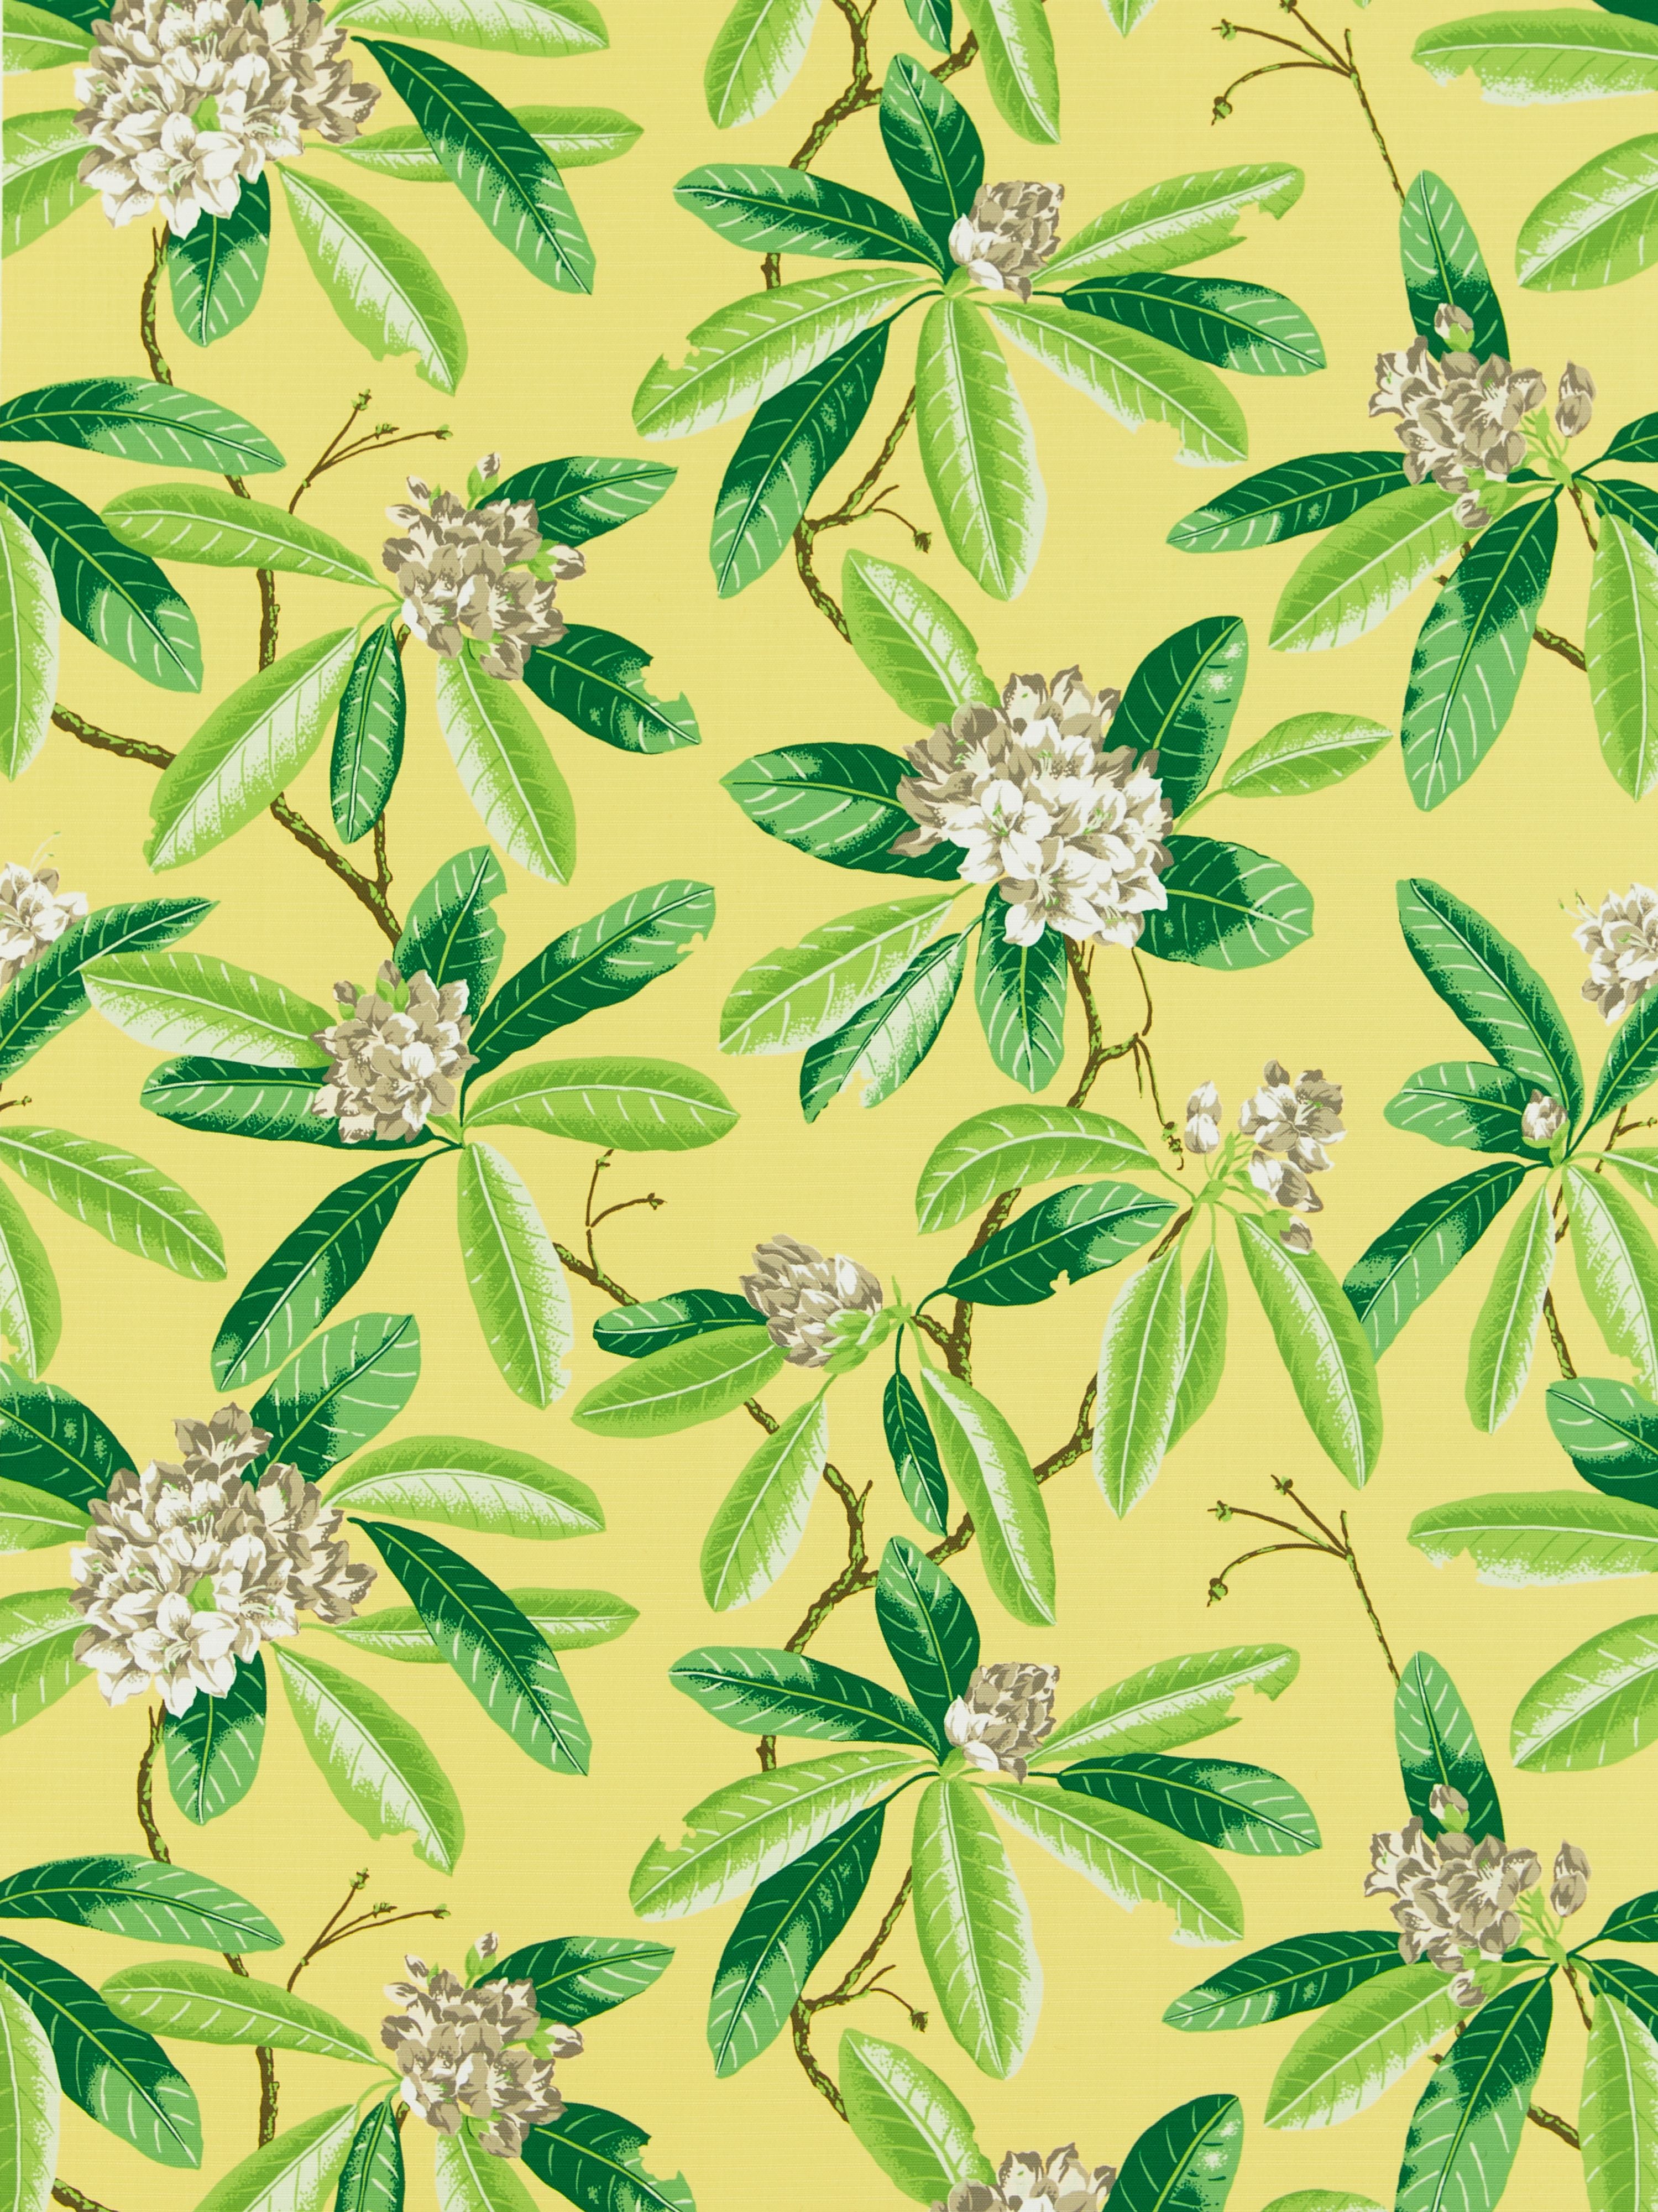 Rhododendron Outdoor fabric in pineapple color - pattern number SC 000216454M - by Scalamandre in the Scalamandre Fabrics Book 1 collection